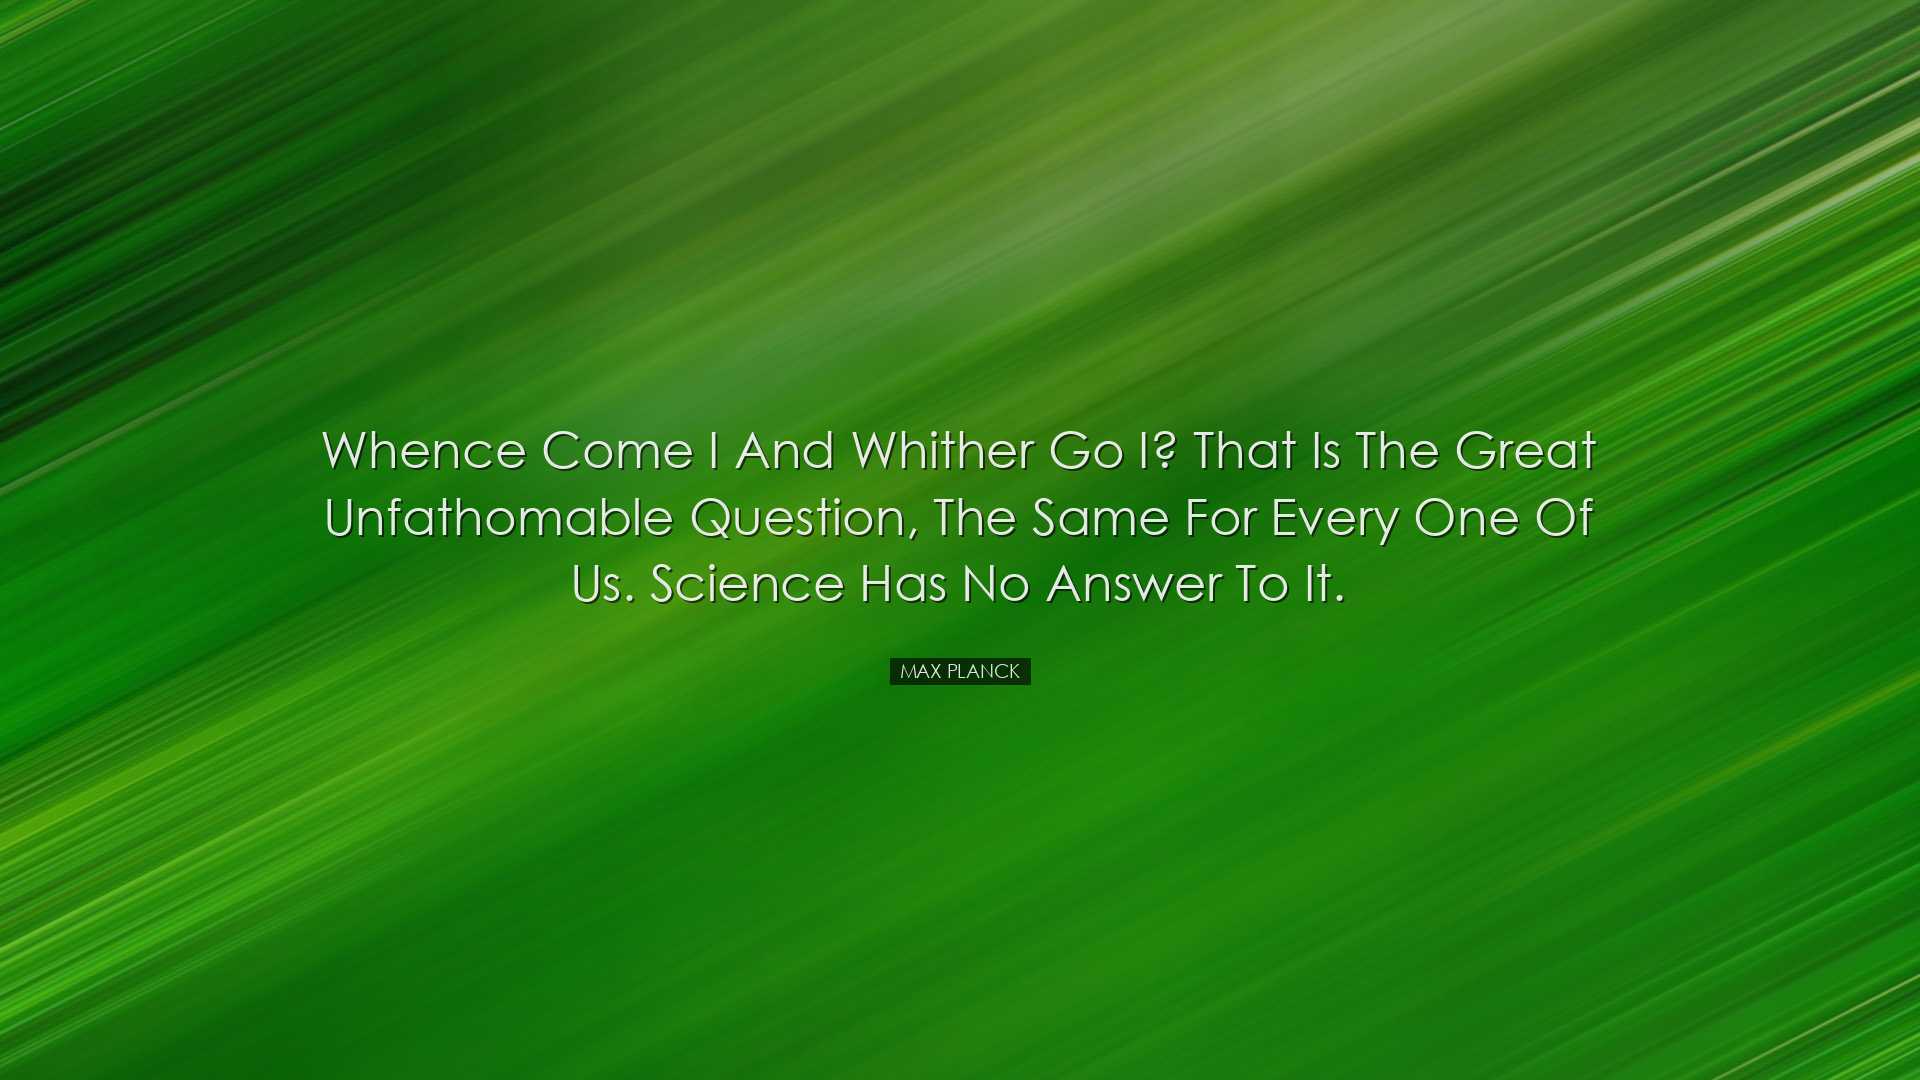 Whence come I and whither go I? That is the great unfathomable que